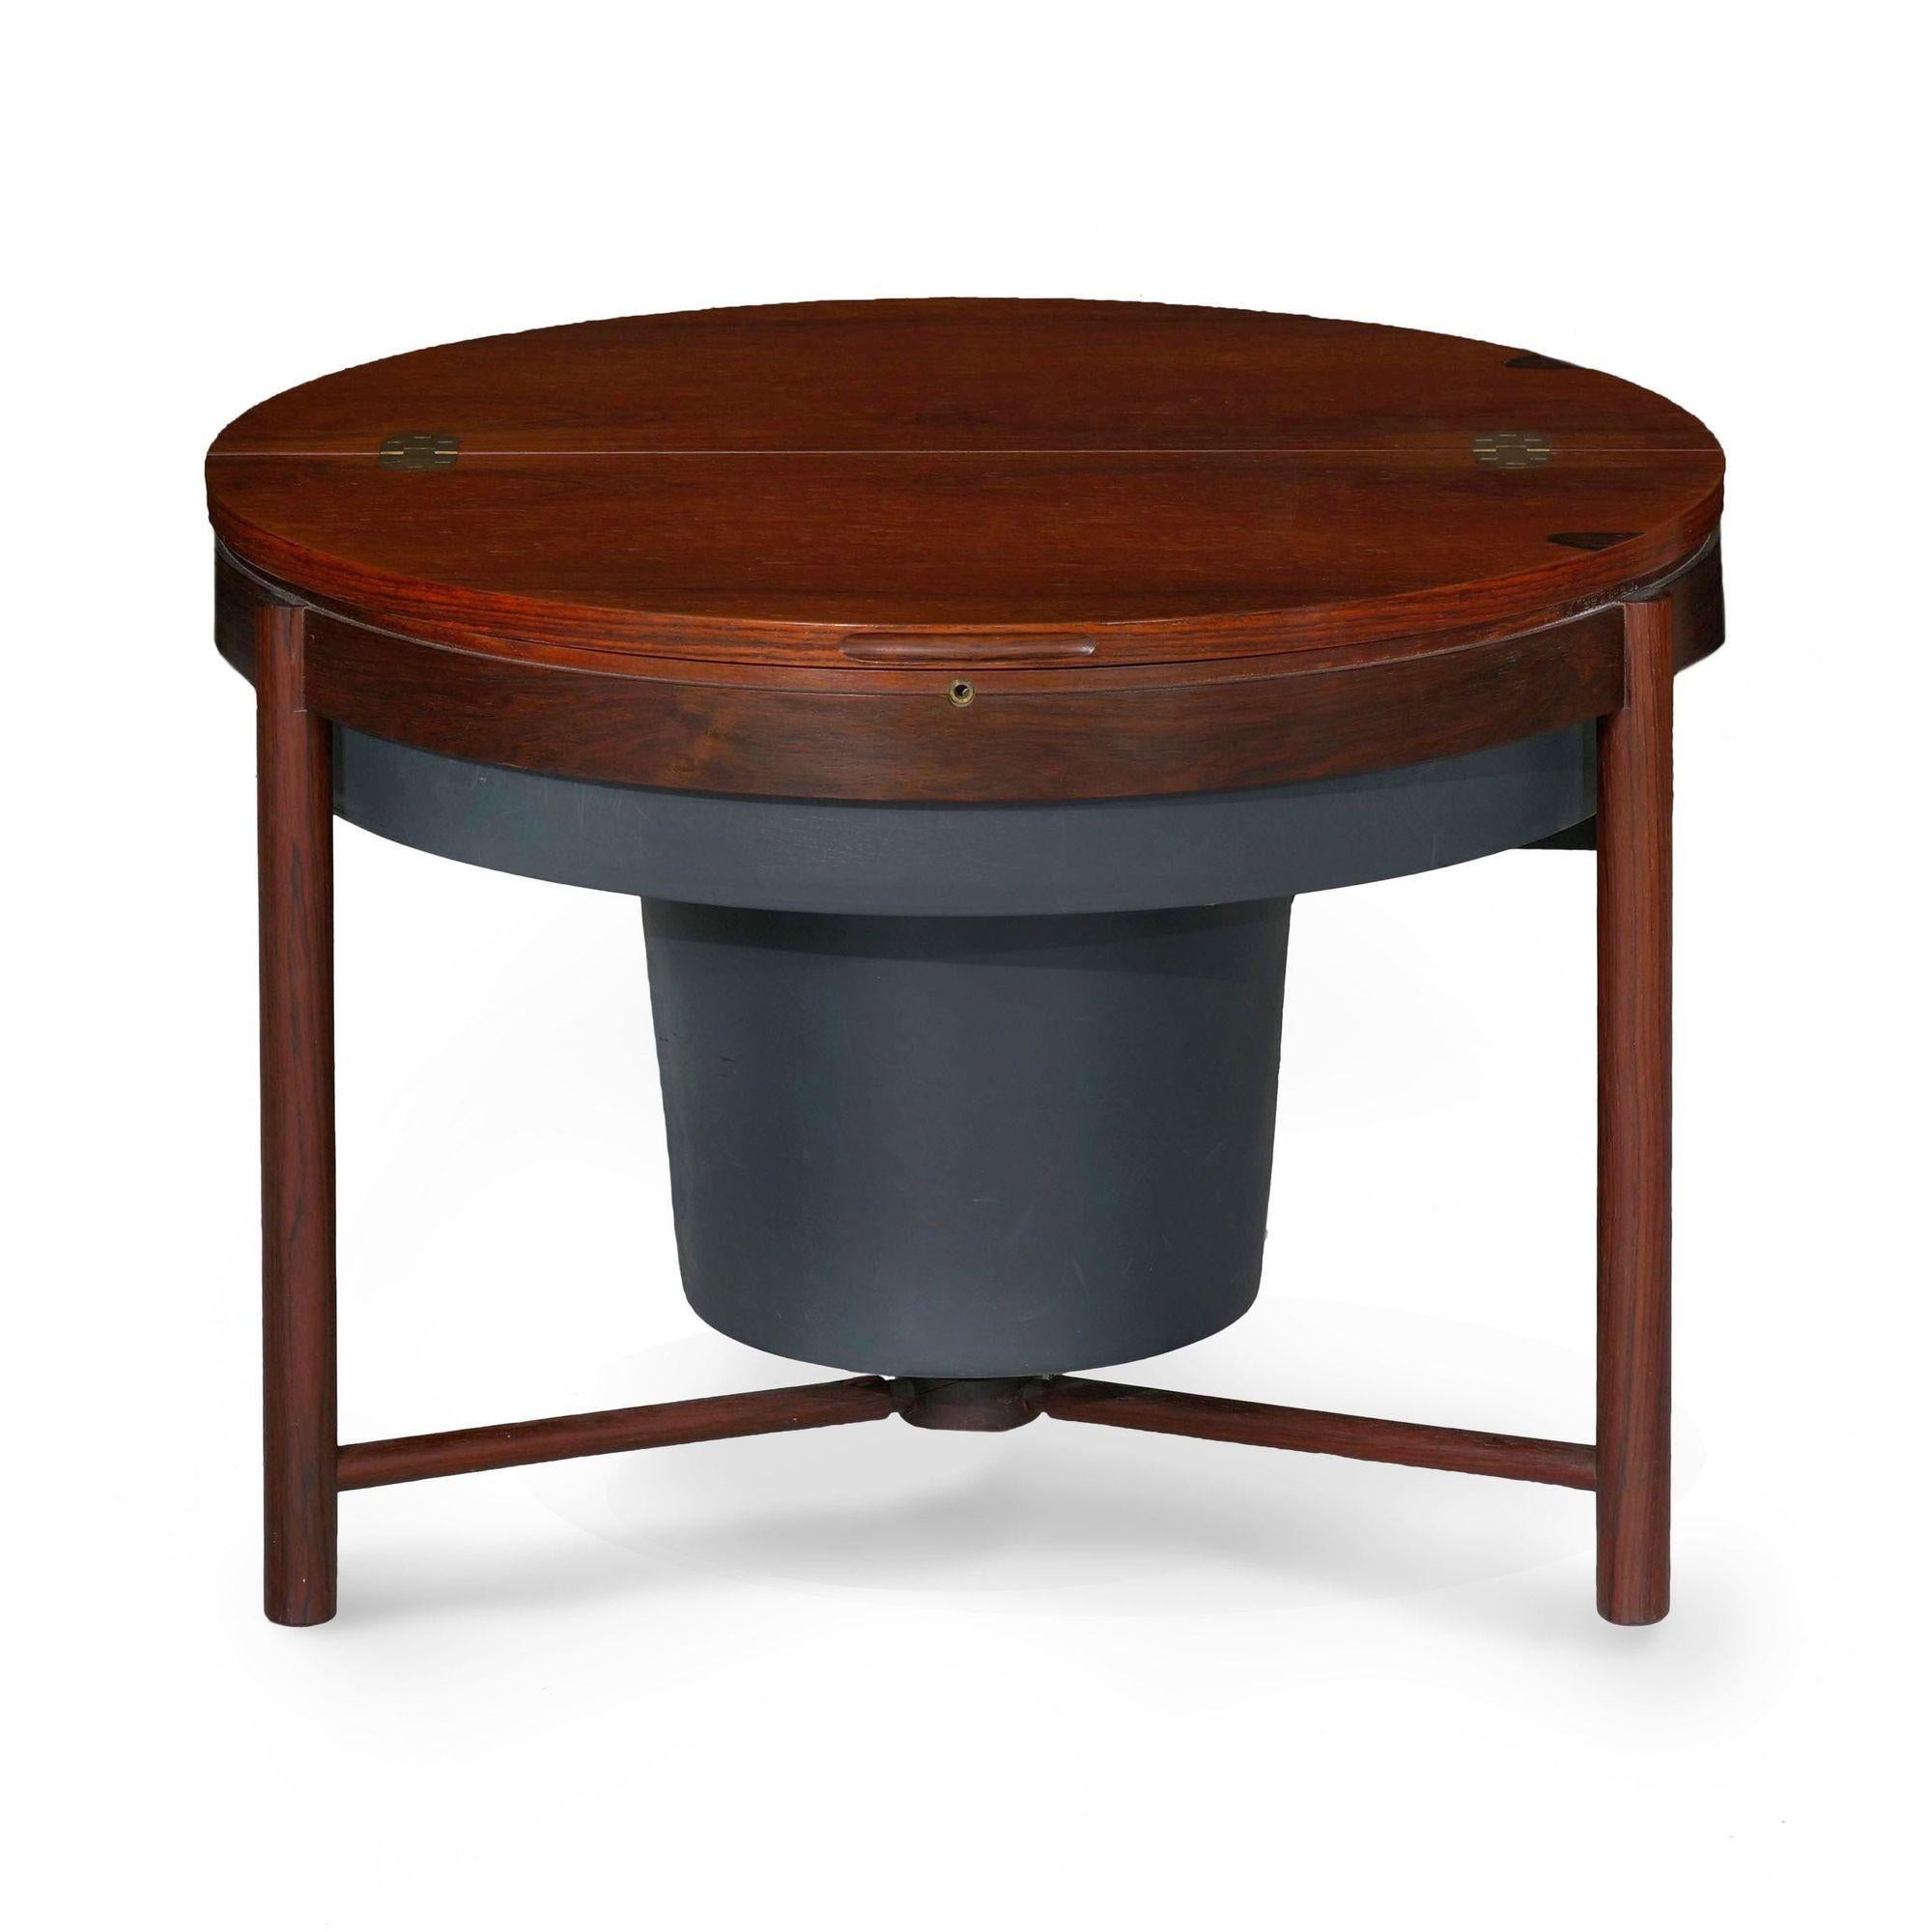 MODERN ROSEWOOD COCKTAIL SERVING BAR TABLE
Designed by Rolf Rastad and Adolf Relling, Norway, circa 1960s; with two stamps 